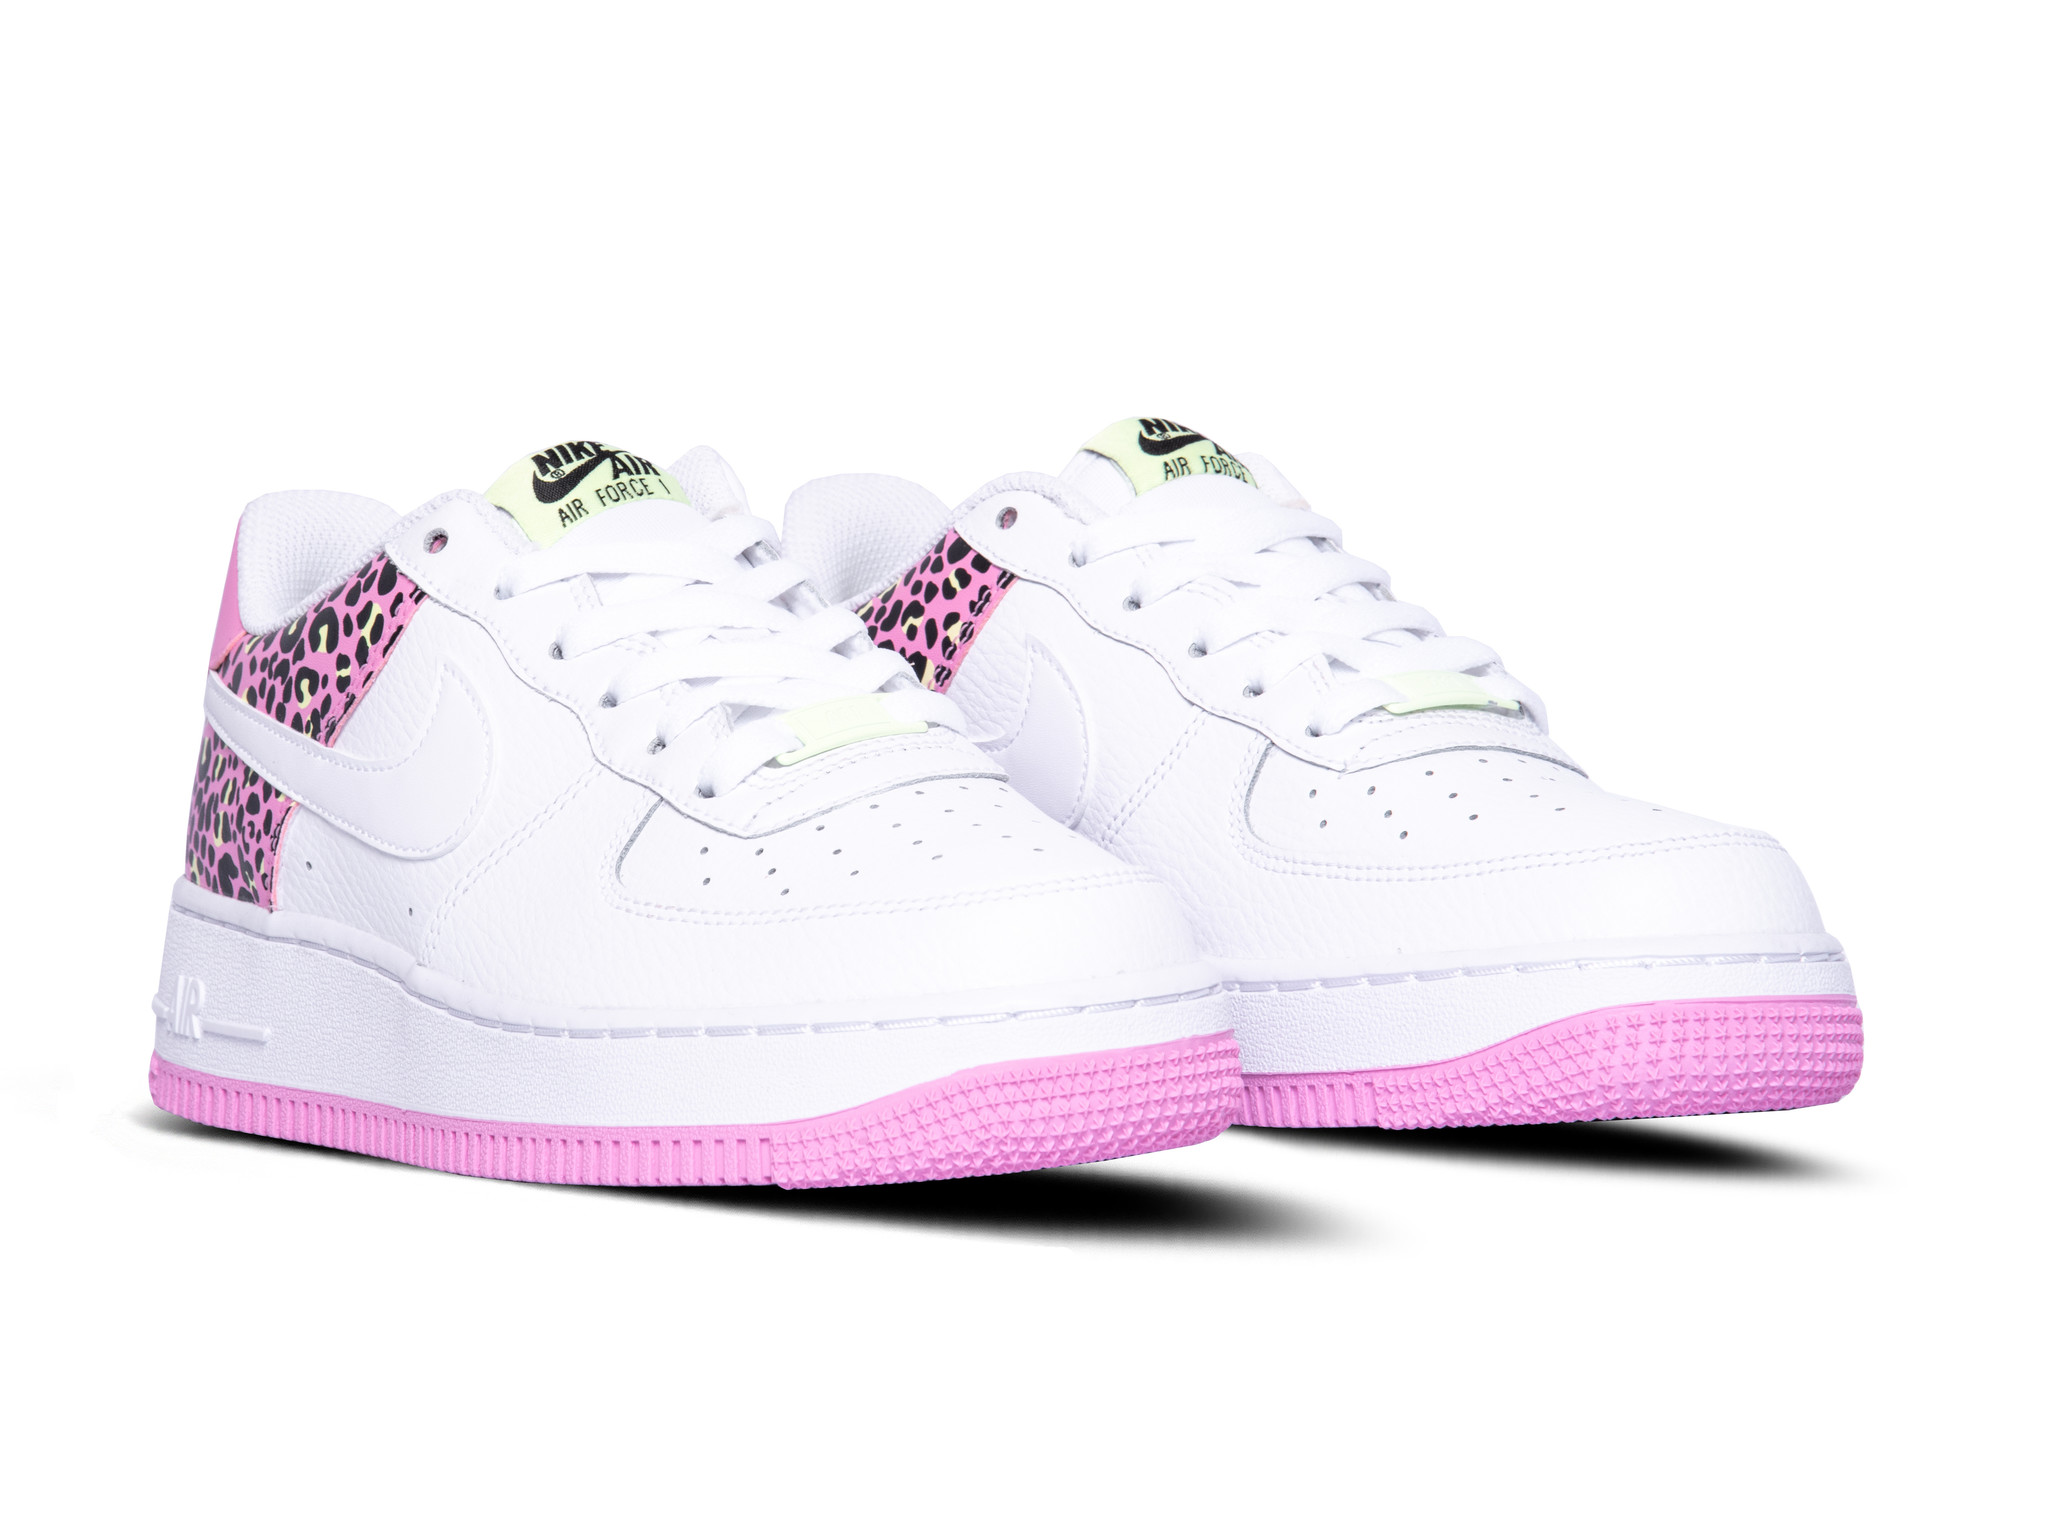 air force 1 pink rise